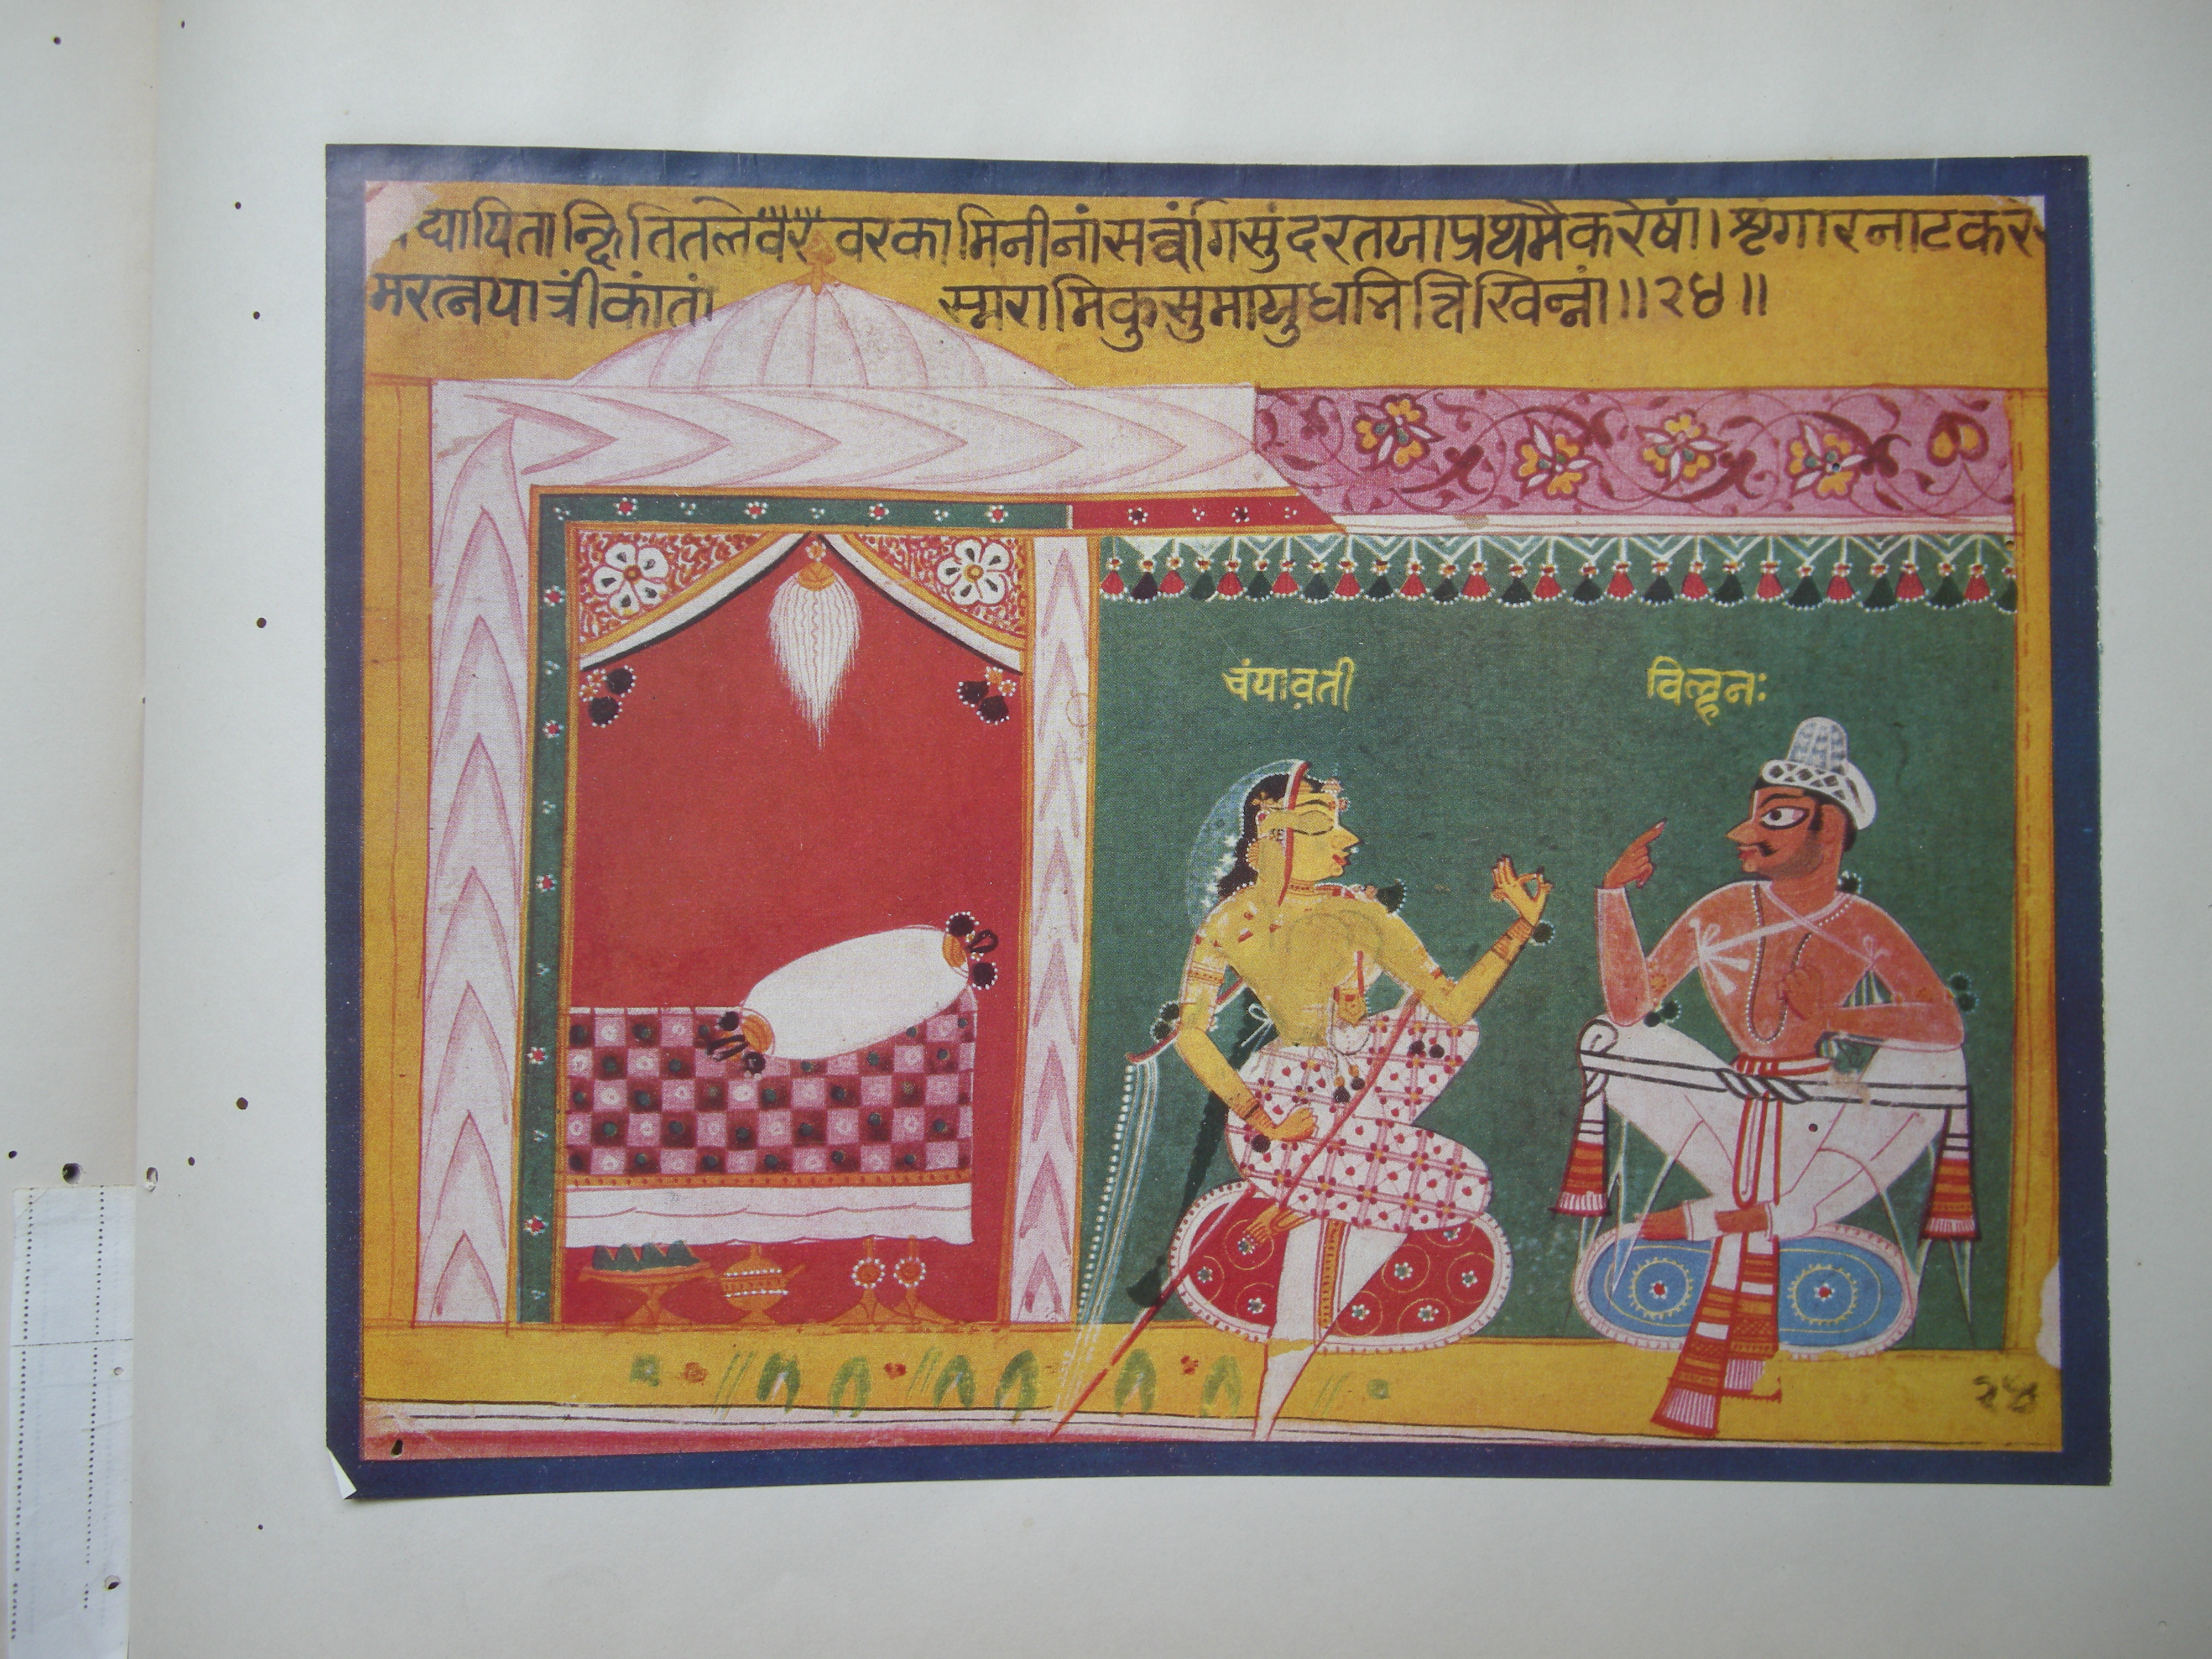 Pictures of the Chaurapanchasika